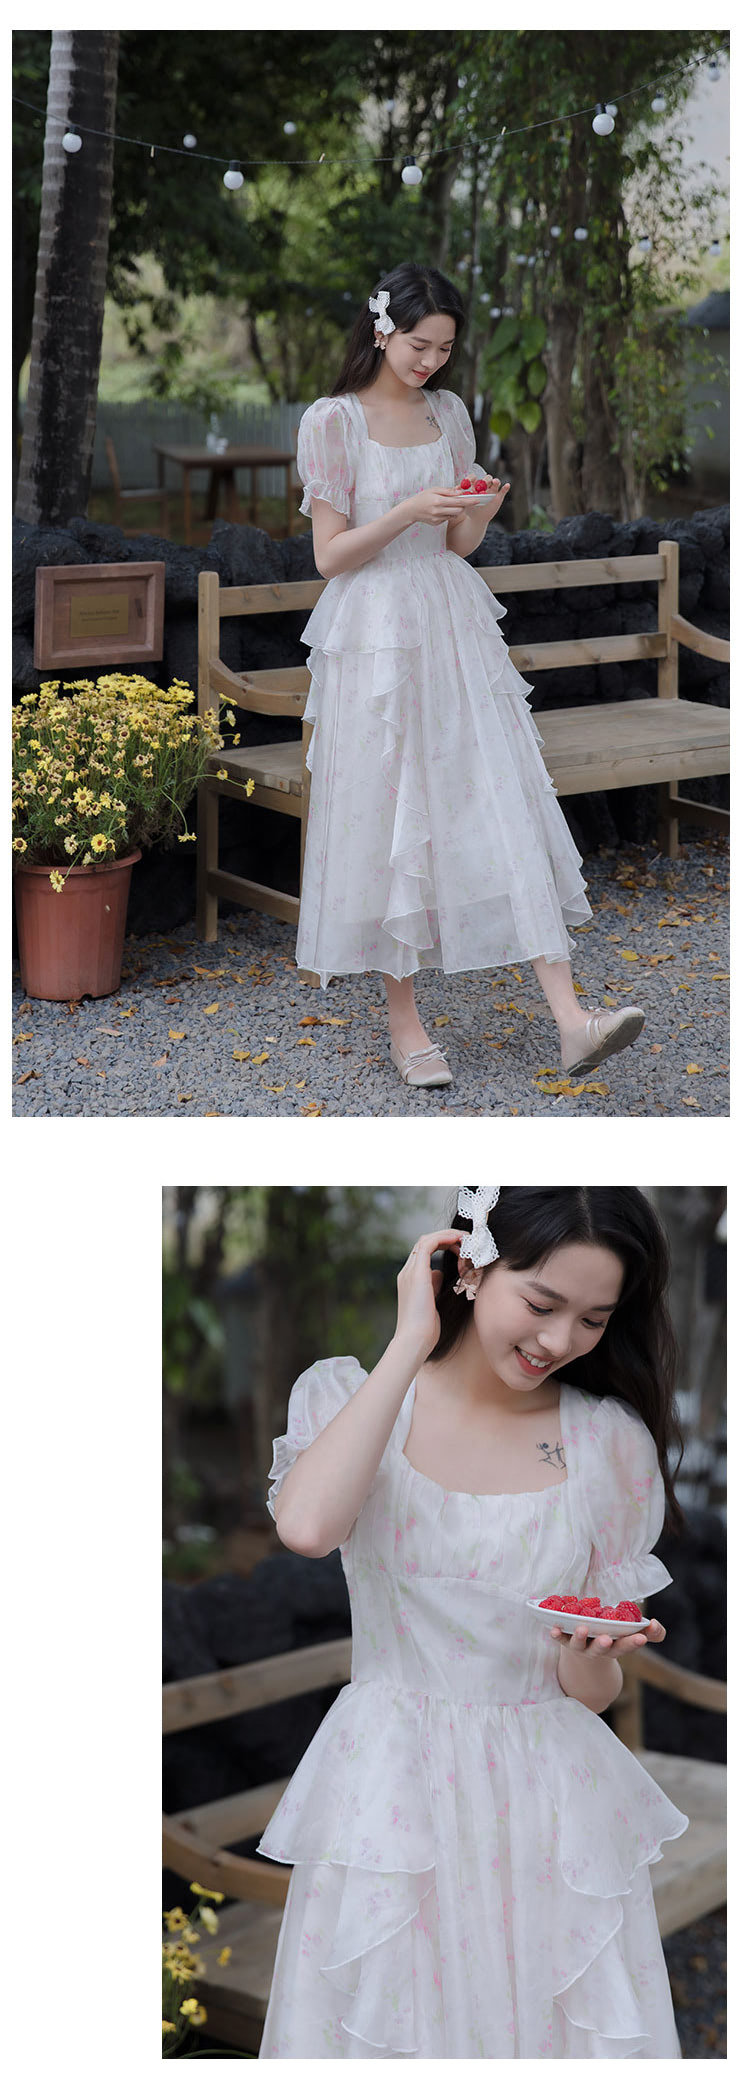 Petite-Sweet-Square-Neck-Floral-White-Summer-Casual-Maxi-Dress11